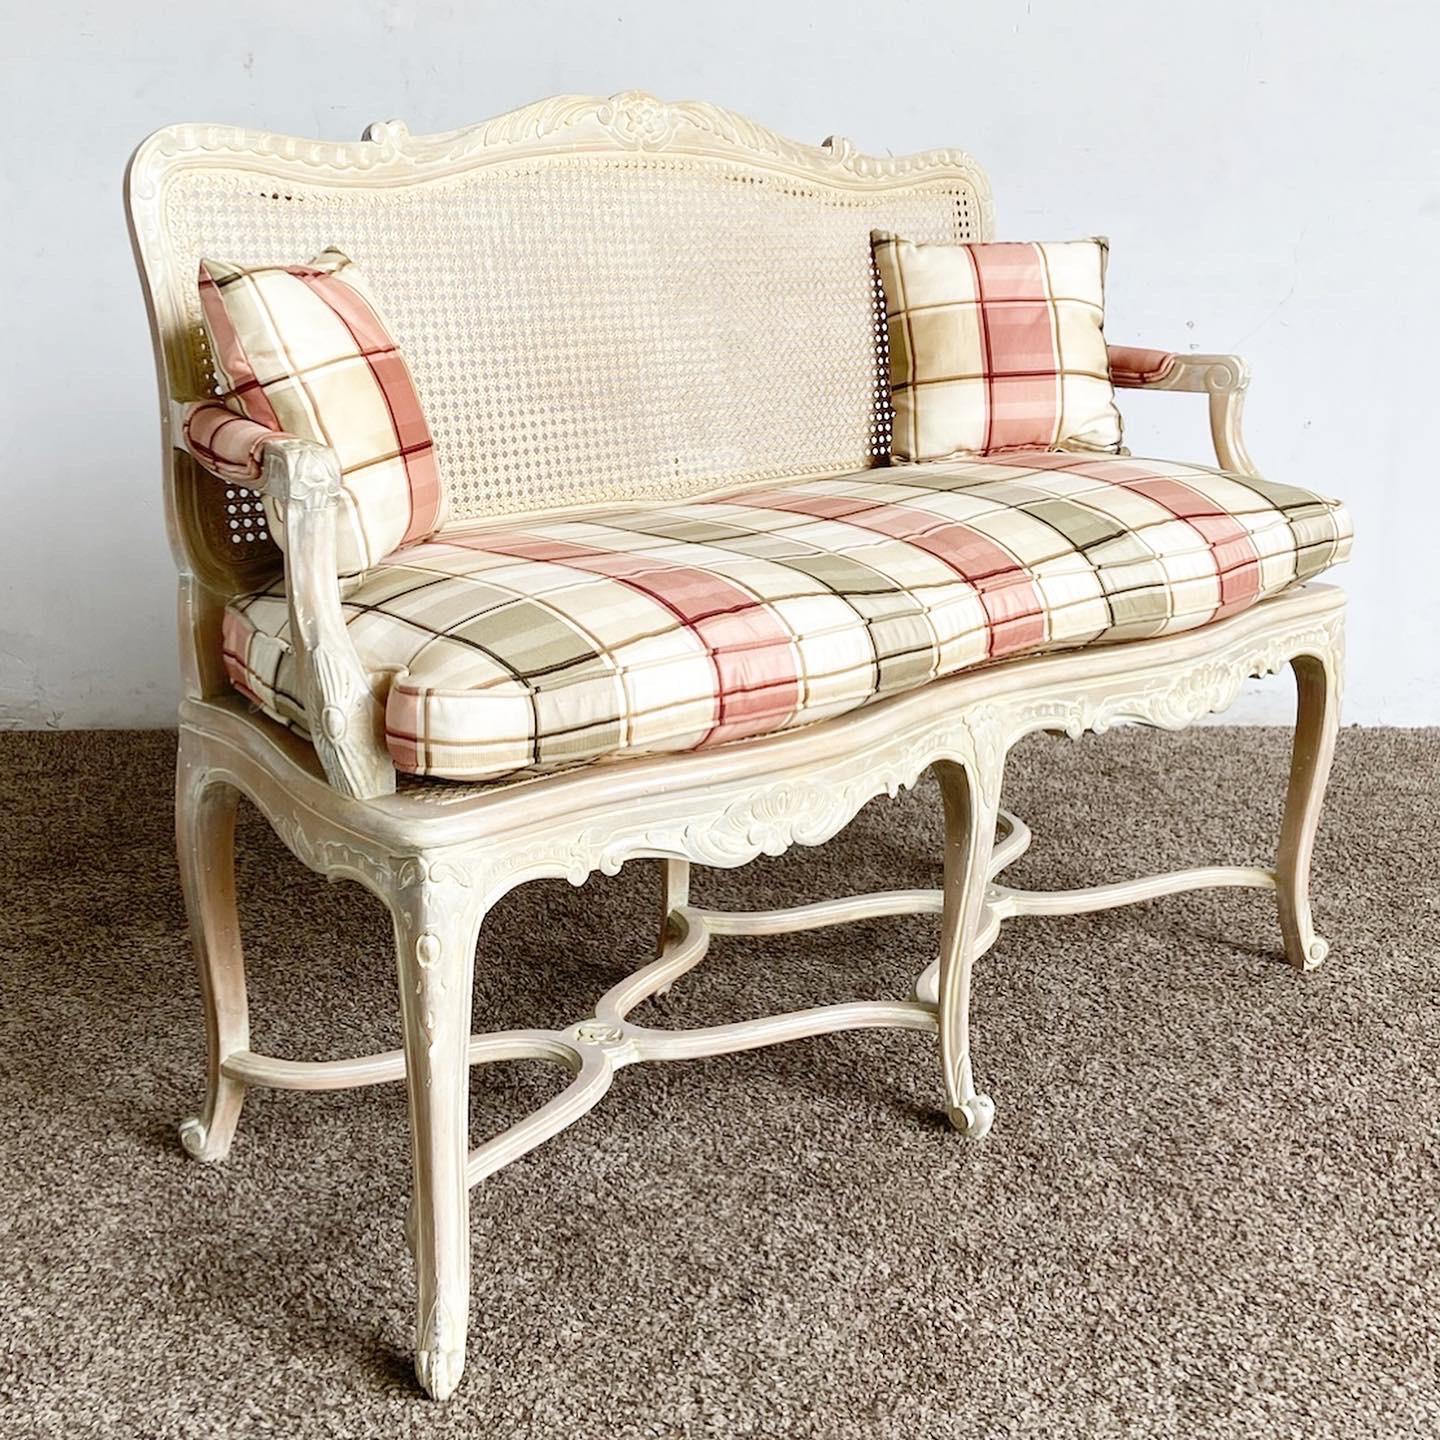 Embrace elegance with our French Style Off White Cane Back Bench/Settee, a blend of traditional French design and sophisticated style for any home setting.

Crafted in the style of traditional French design with a beautiful cane back